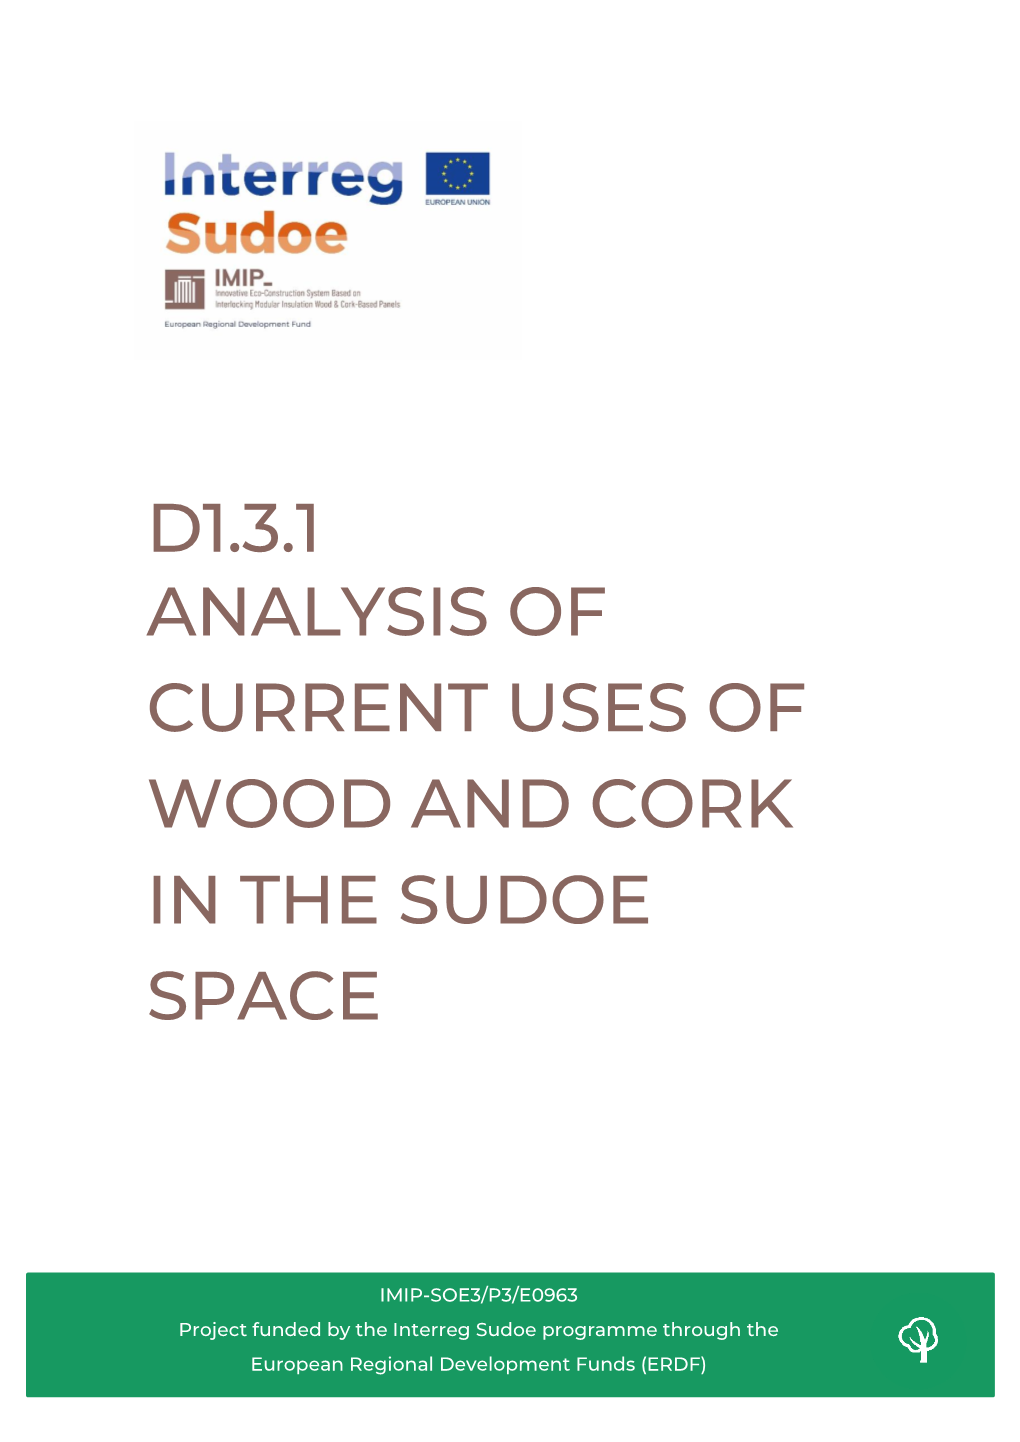 D1.3.1 Analysis of Current Uses of Wood and Cork in the Sudoe